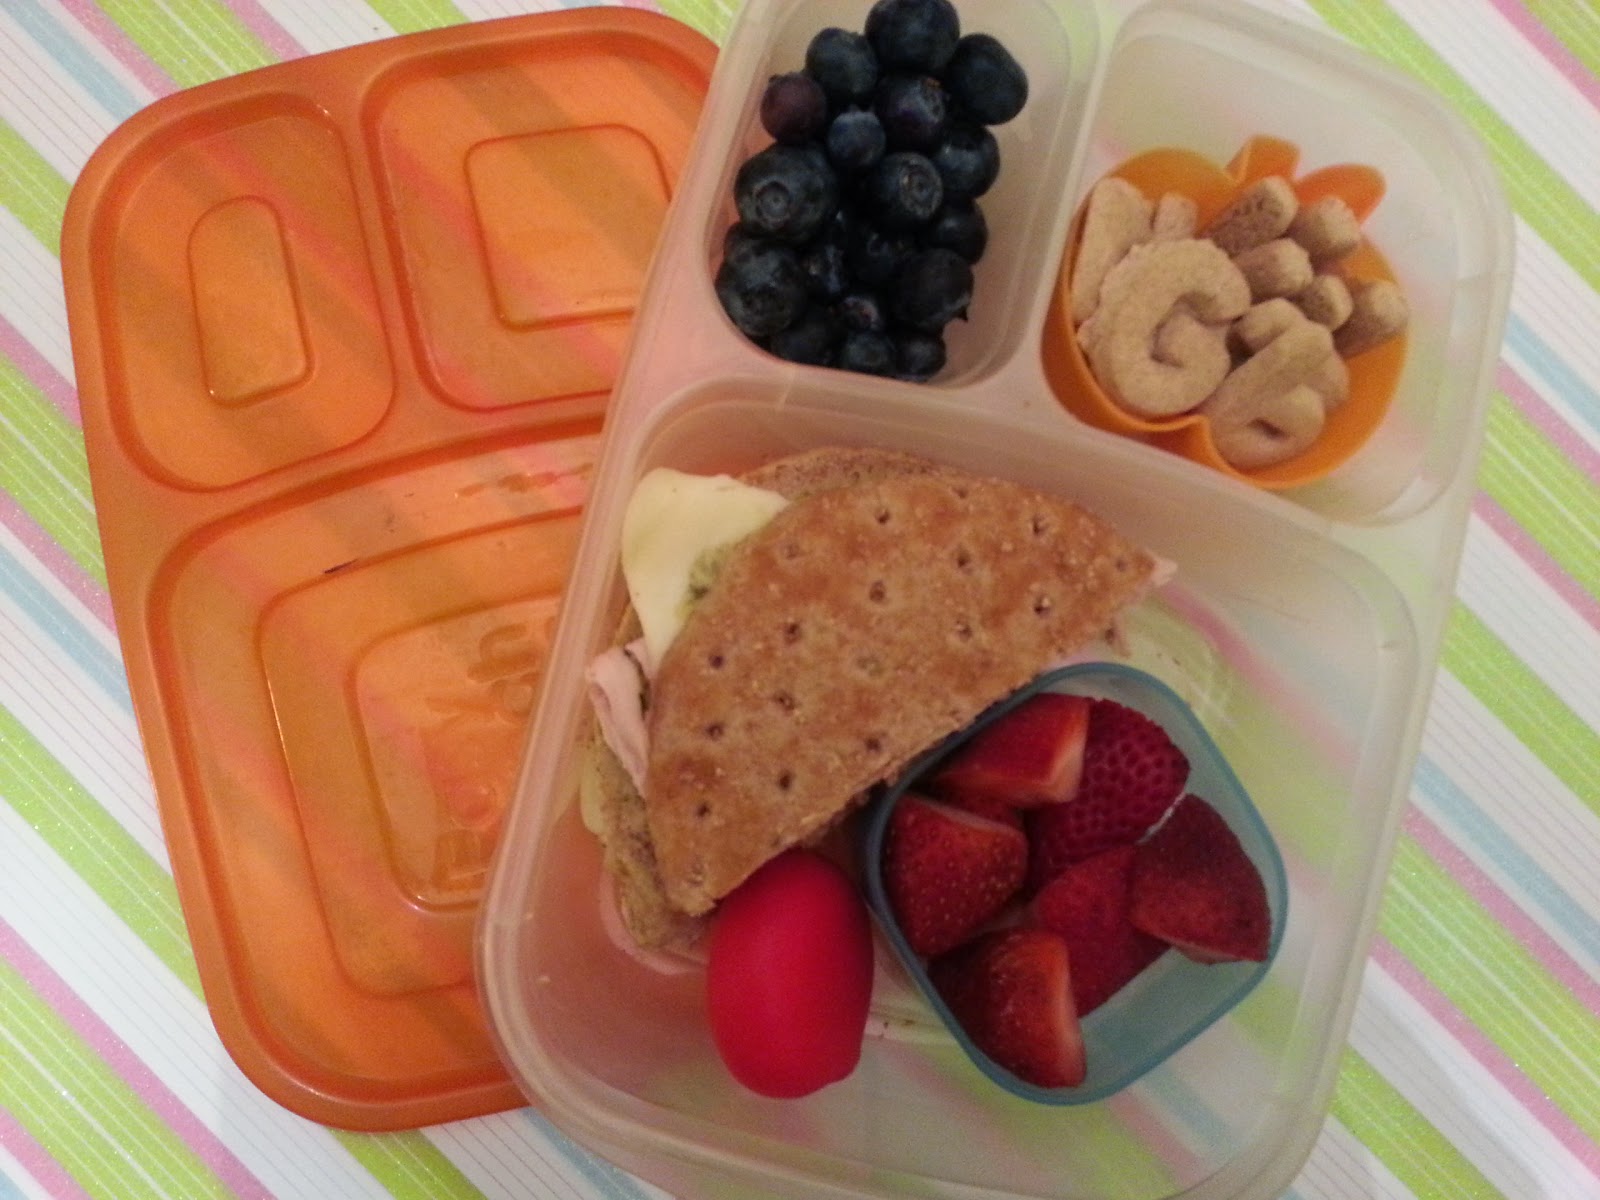 Lunches Fit For a Kid: Lunches: 6.12.14